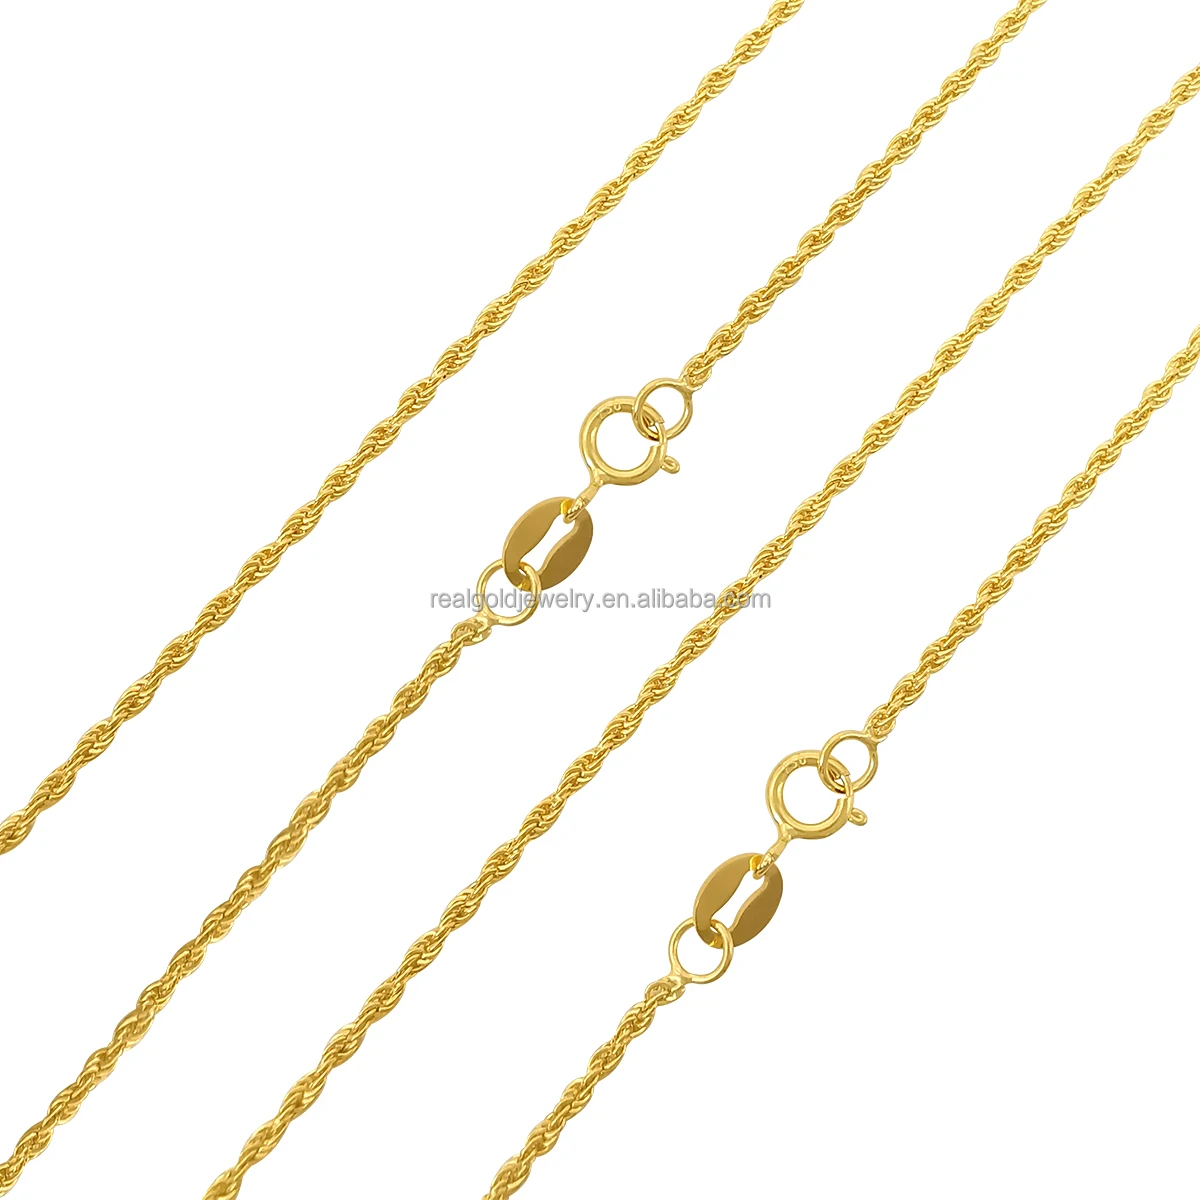 

AU750 Fine Jewelry Necklace Chain 18K Solid Gold Rope Chain 1.2mm Thickness Custom Design Chinese Gold Chain